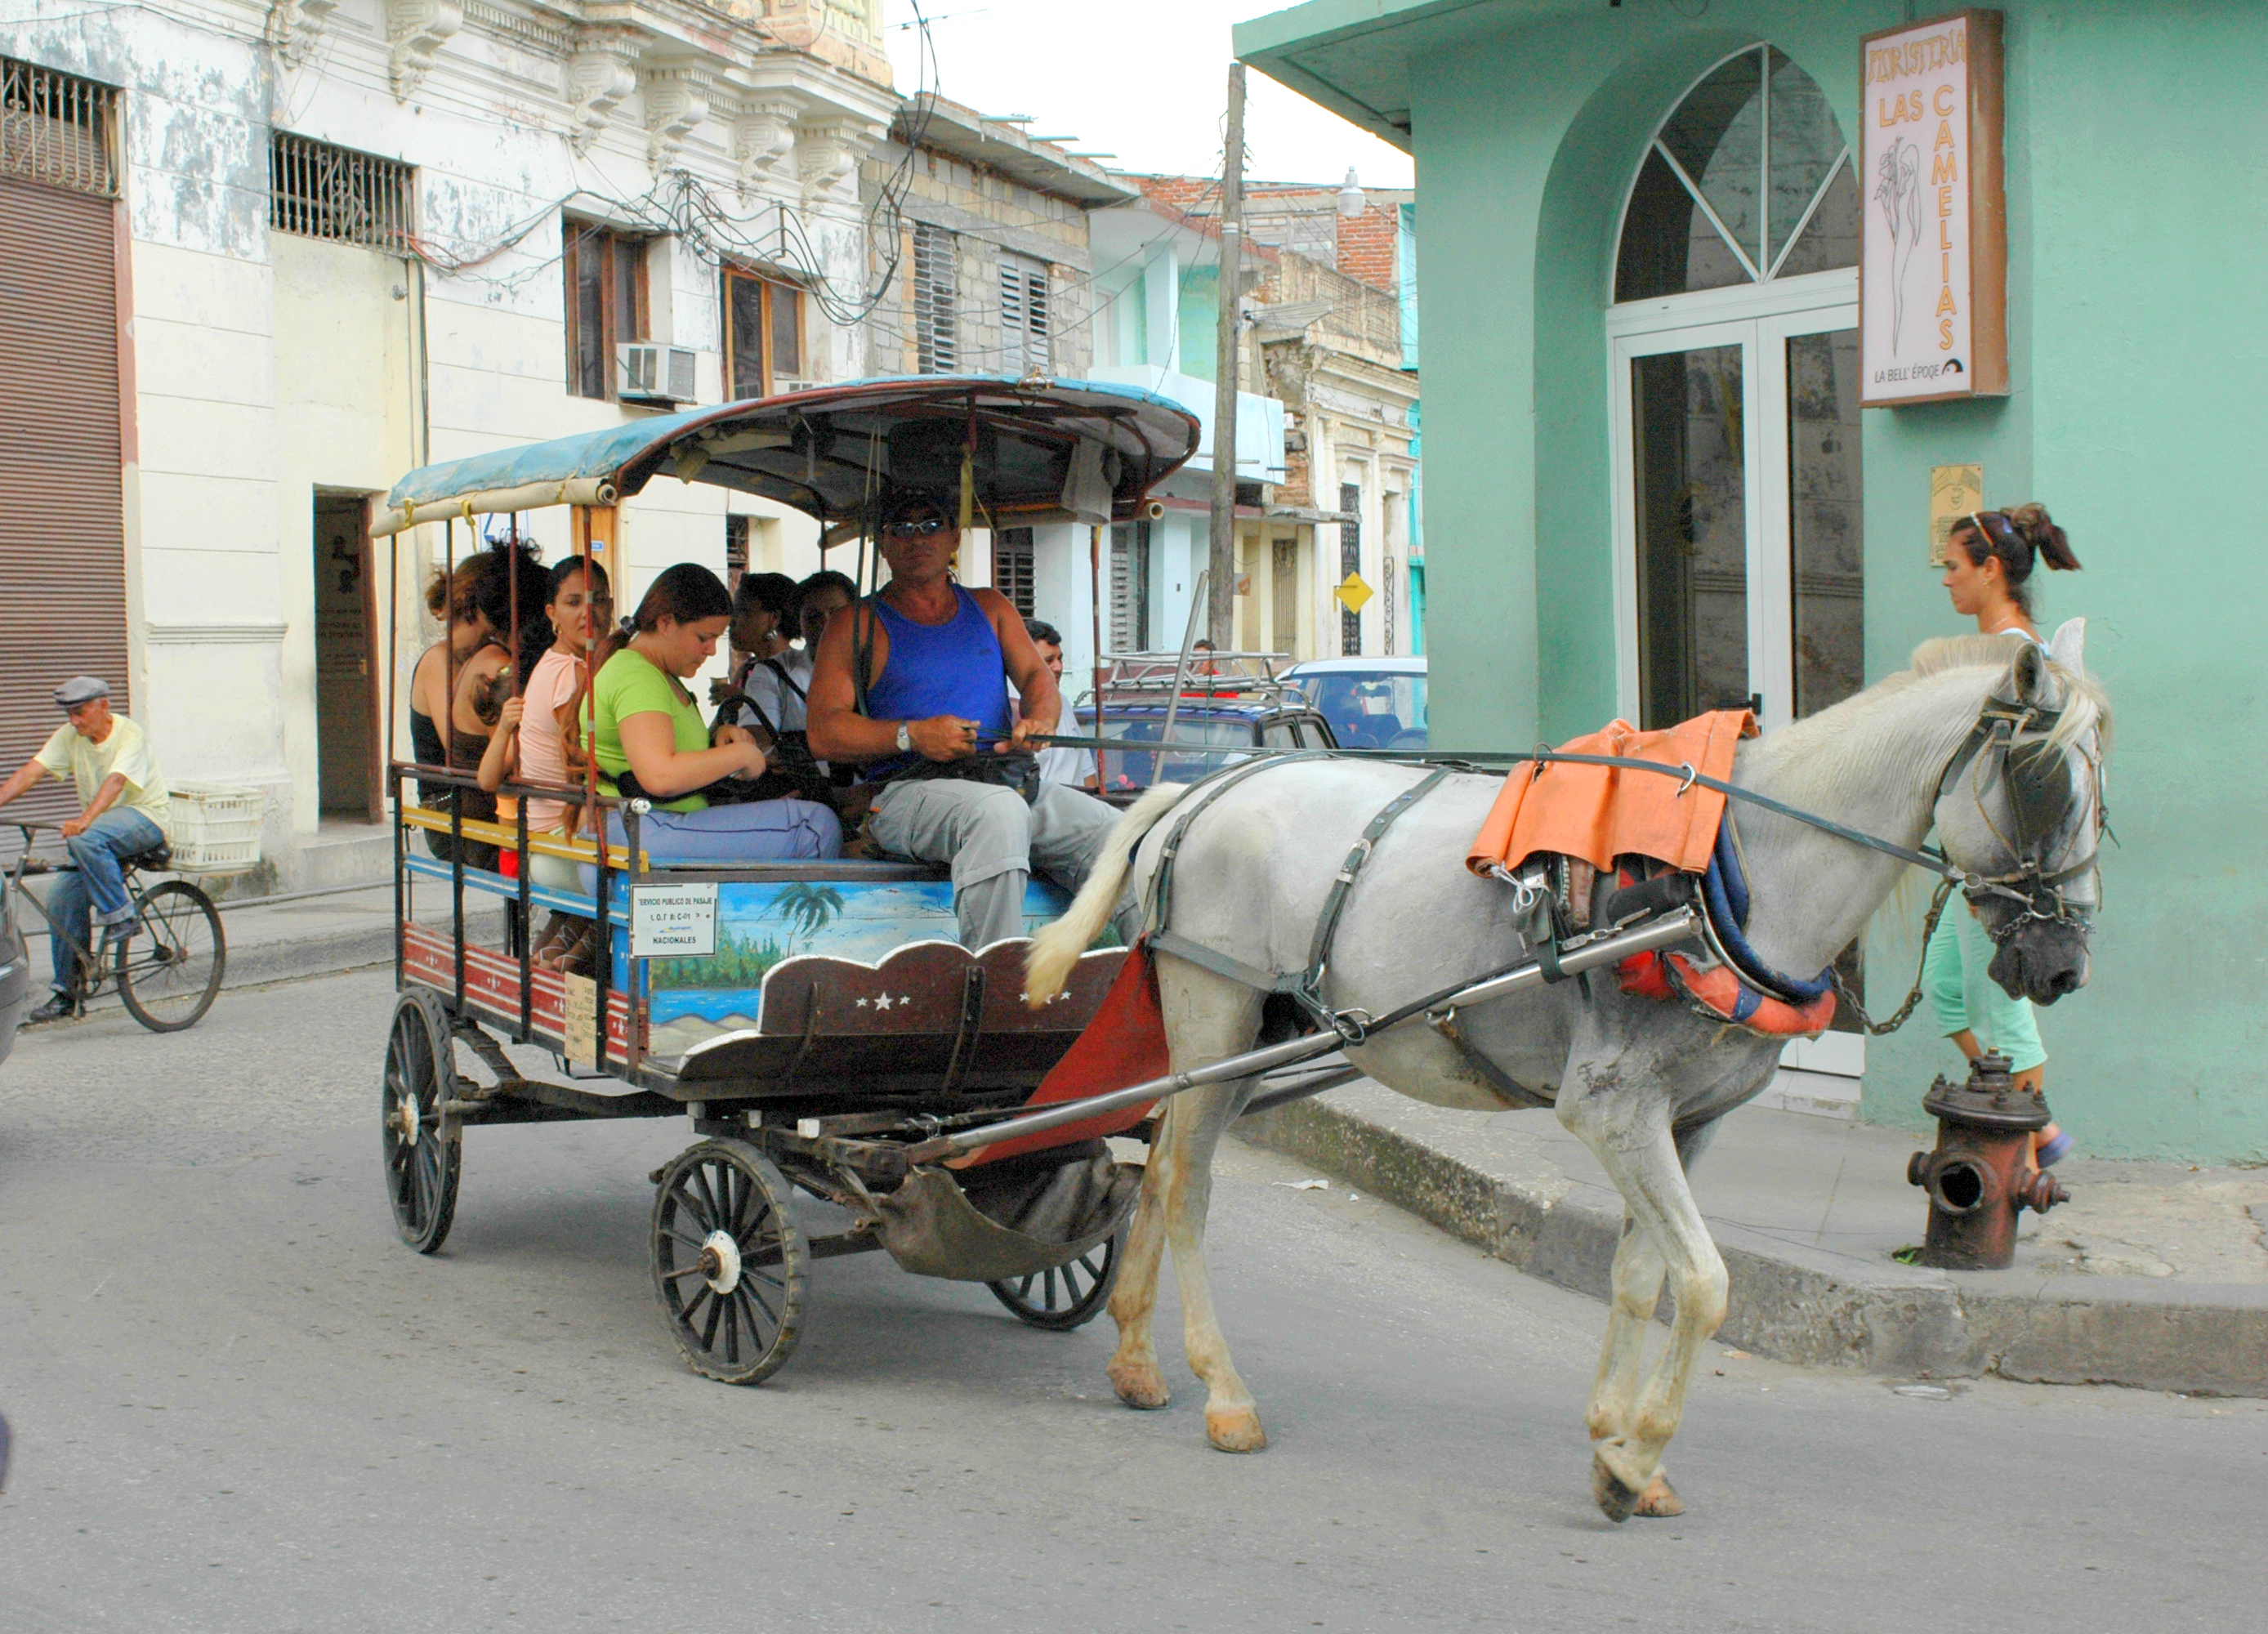 The horse-drawn carriages (coches de caballo) , public transportation in Cuba. Travel tips, two currencies in Cuba.